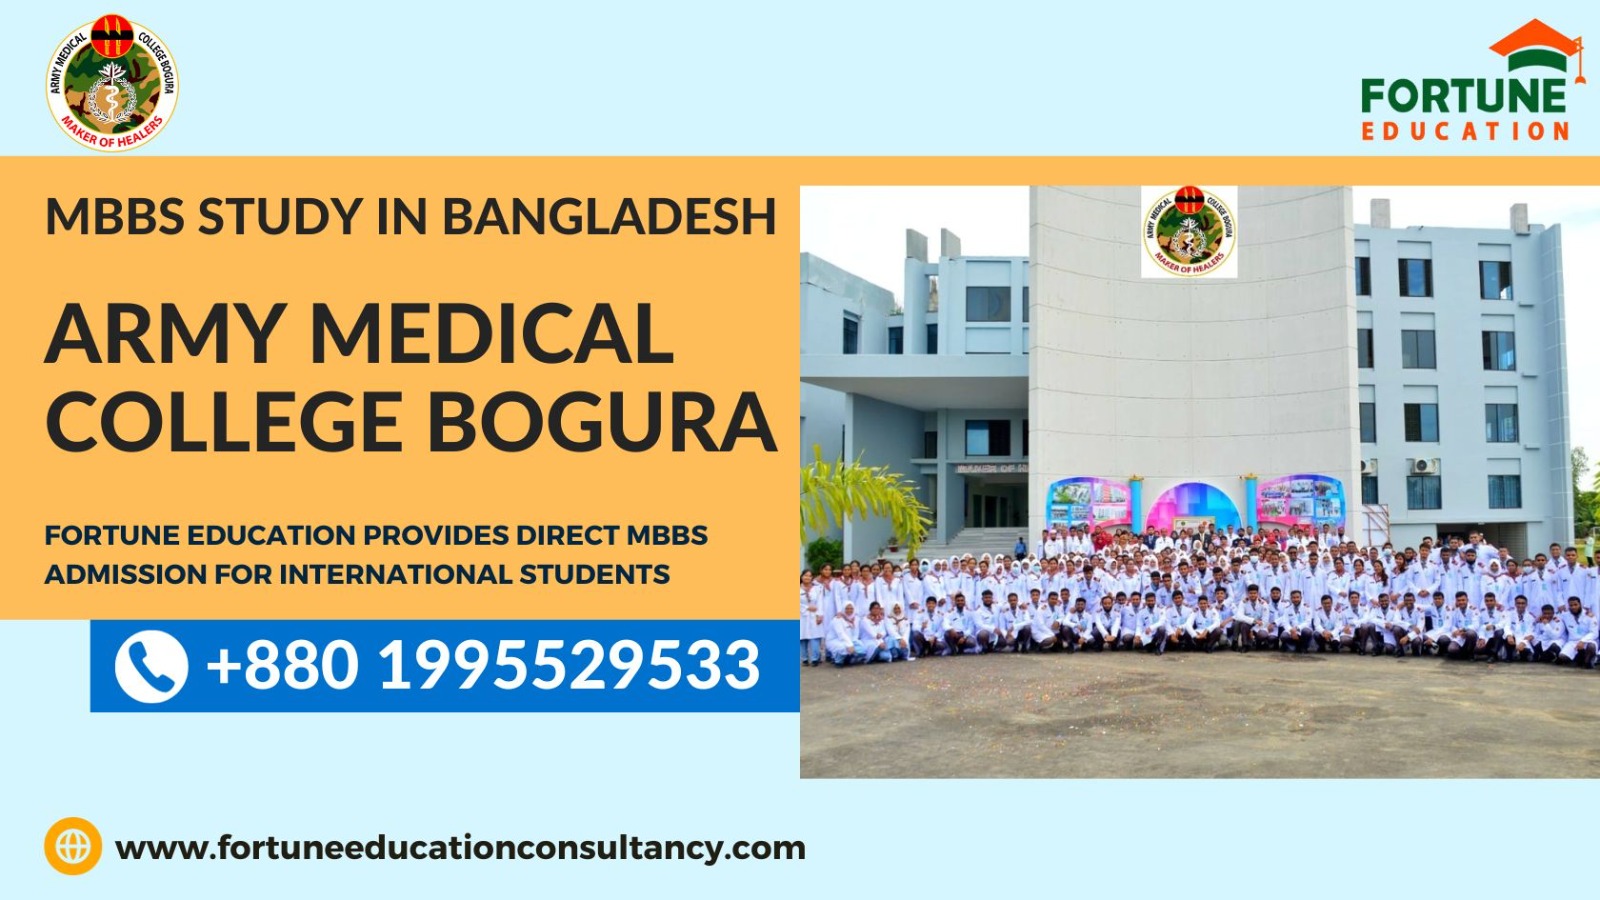 List of Top Medical Colleges in Bangladesh